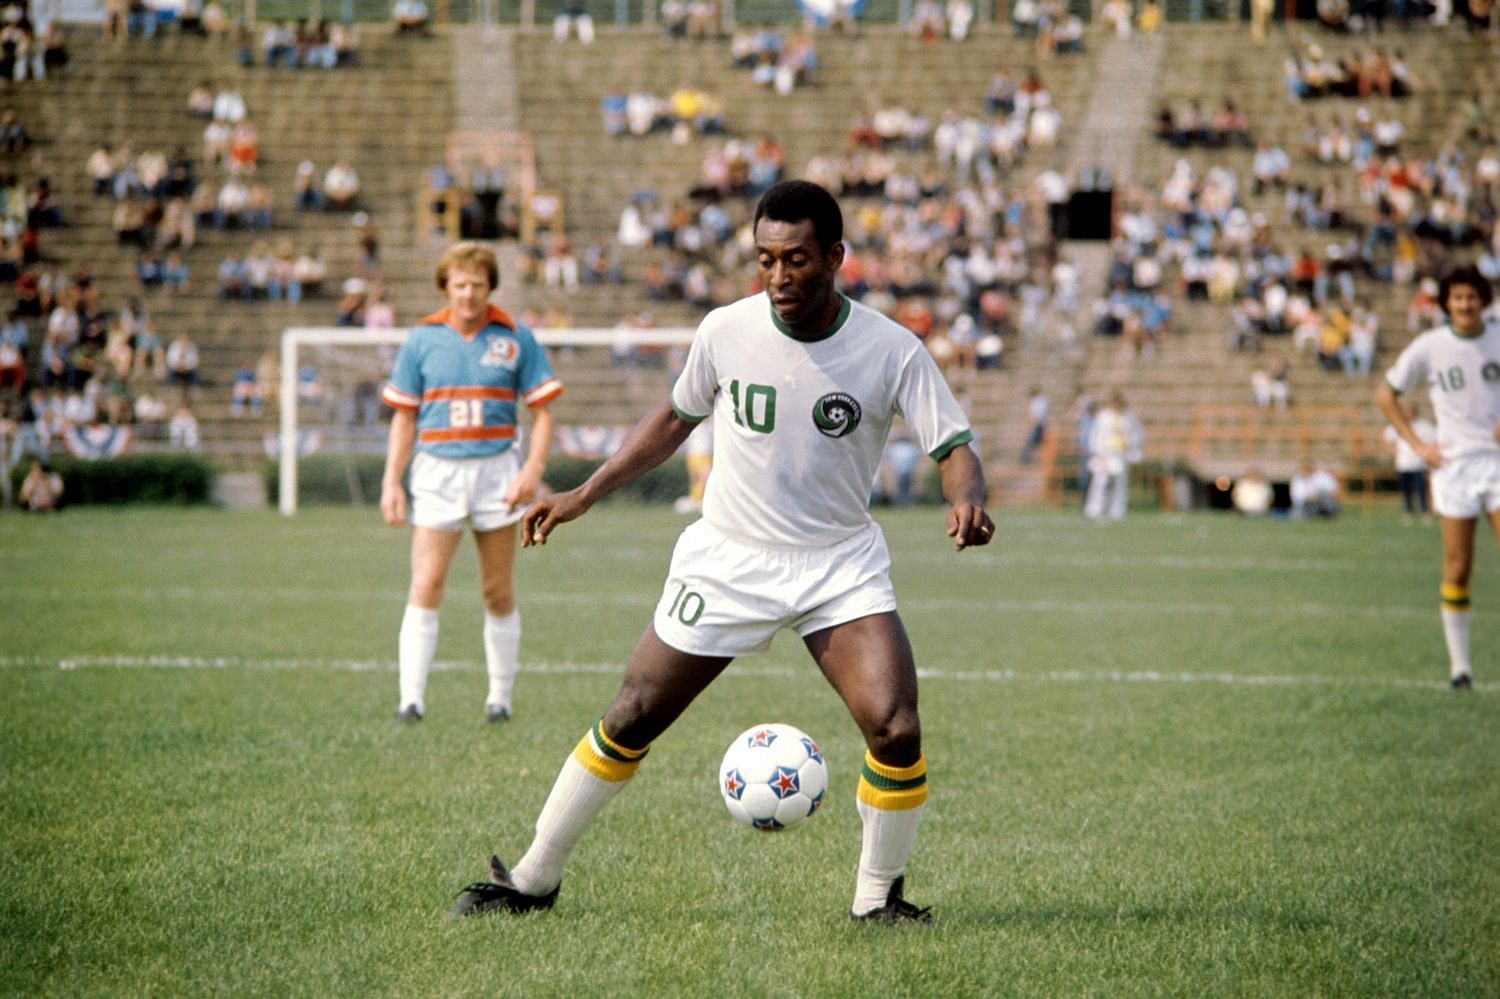 Pelé in action (credit: Whoateallthepies)